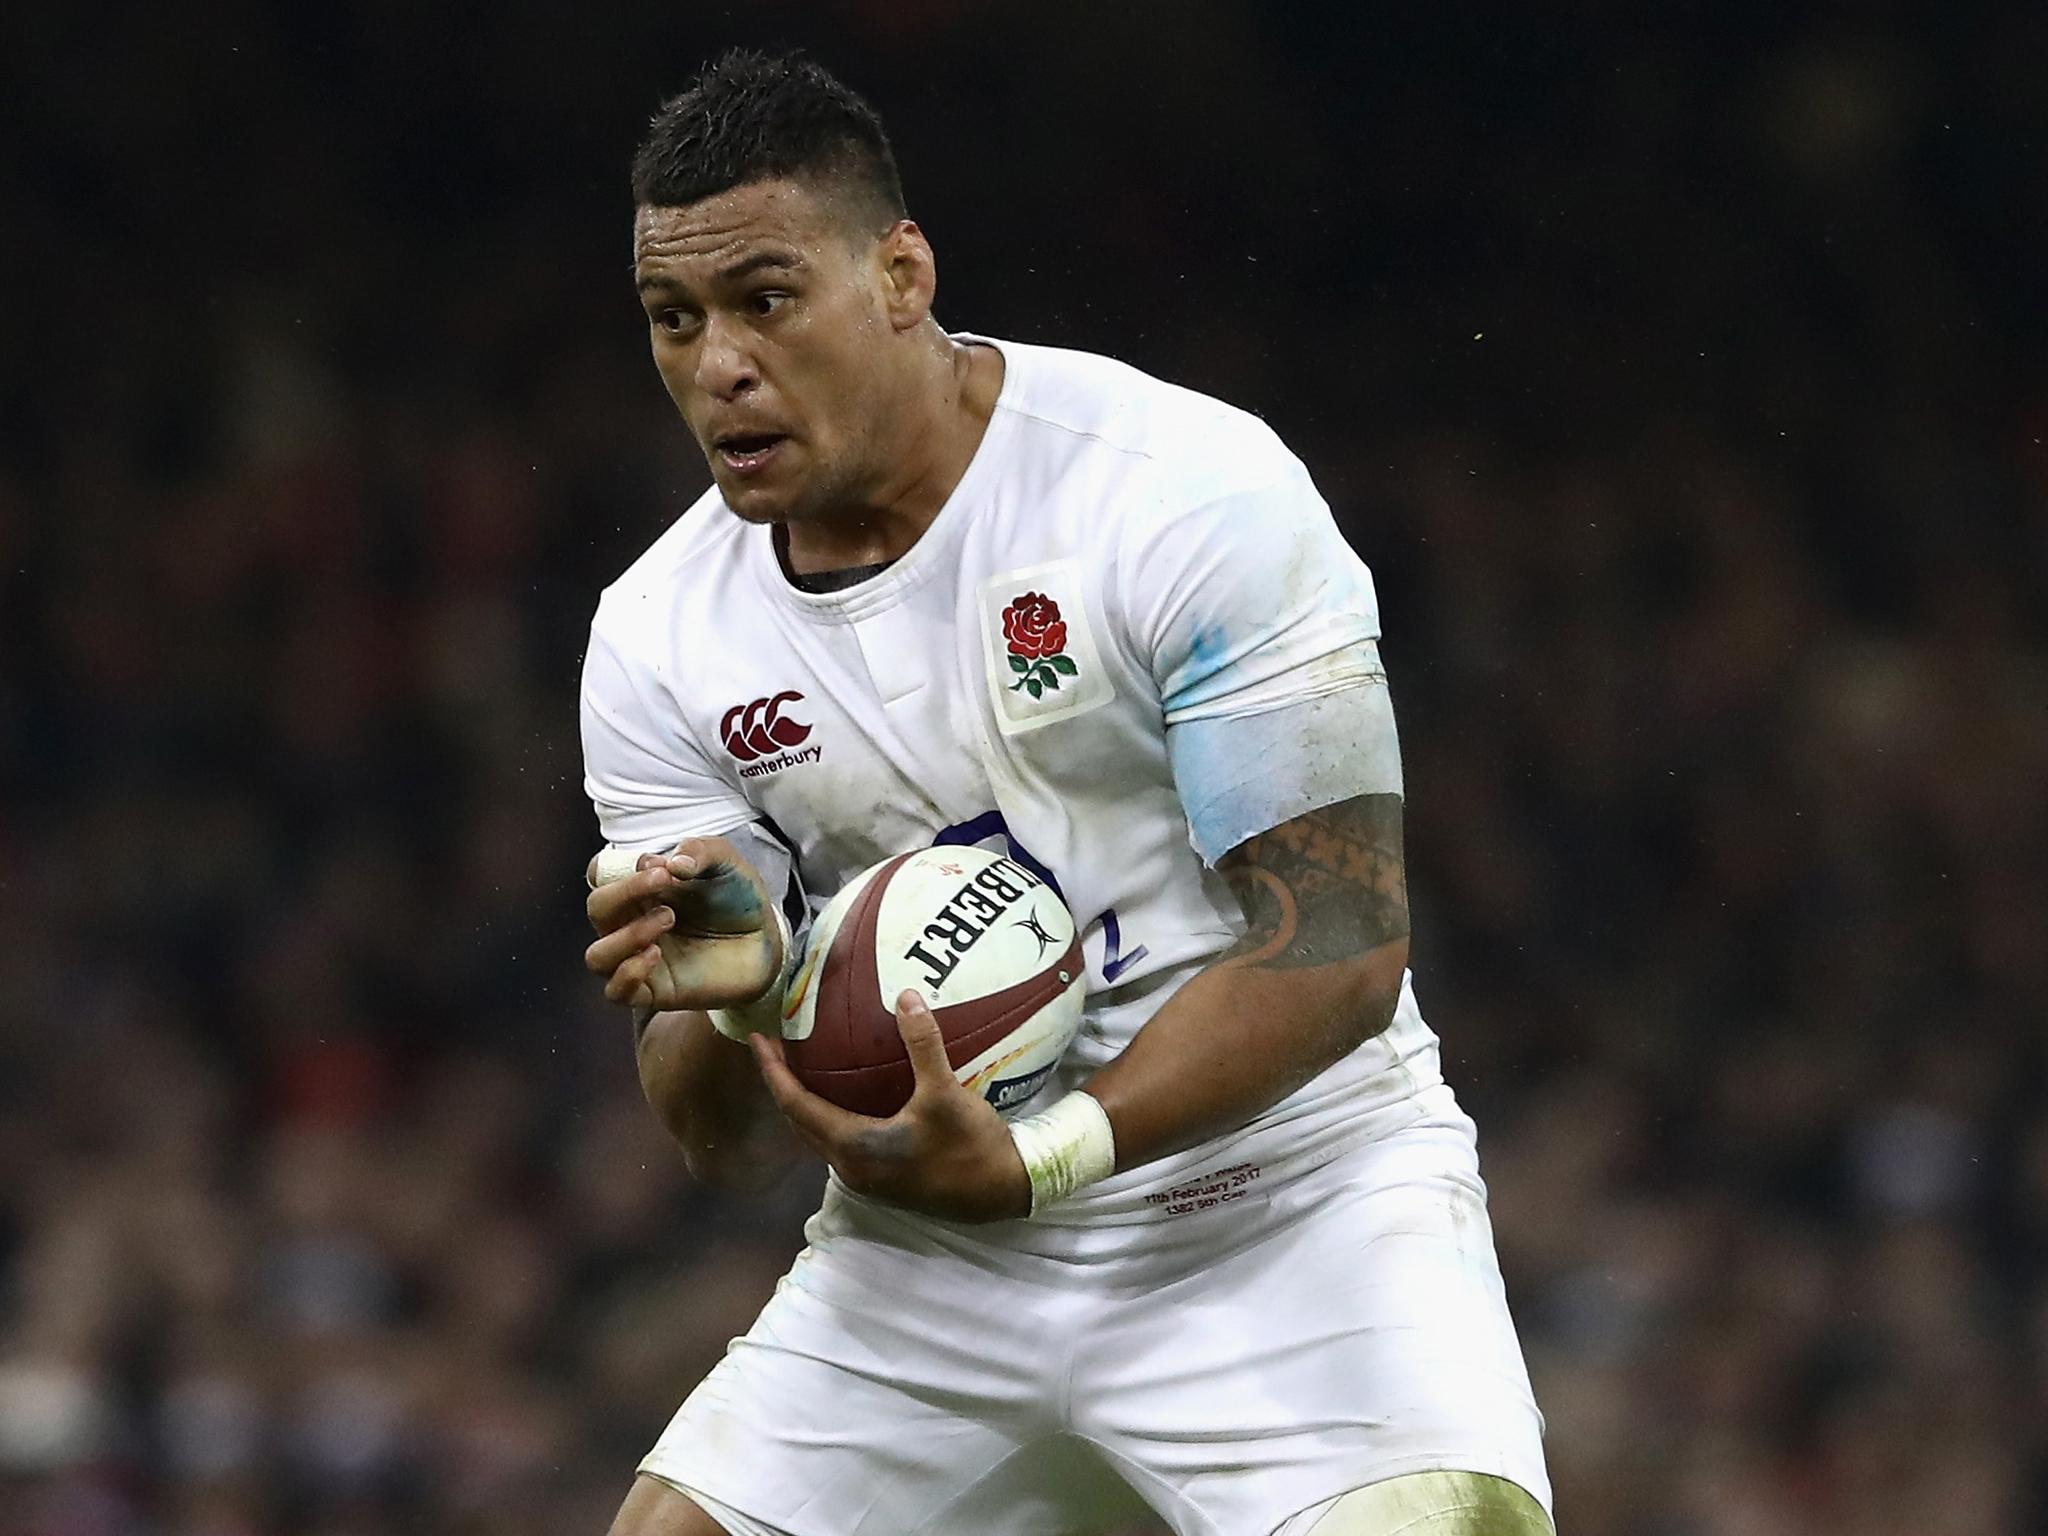 Anthony Watson makes Leicester Tigers debut after ten months on sidelines